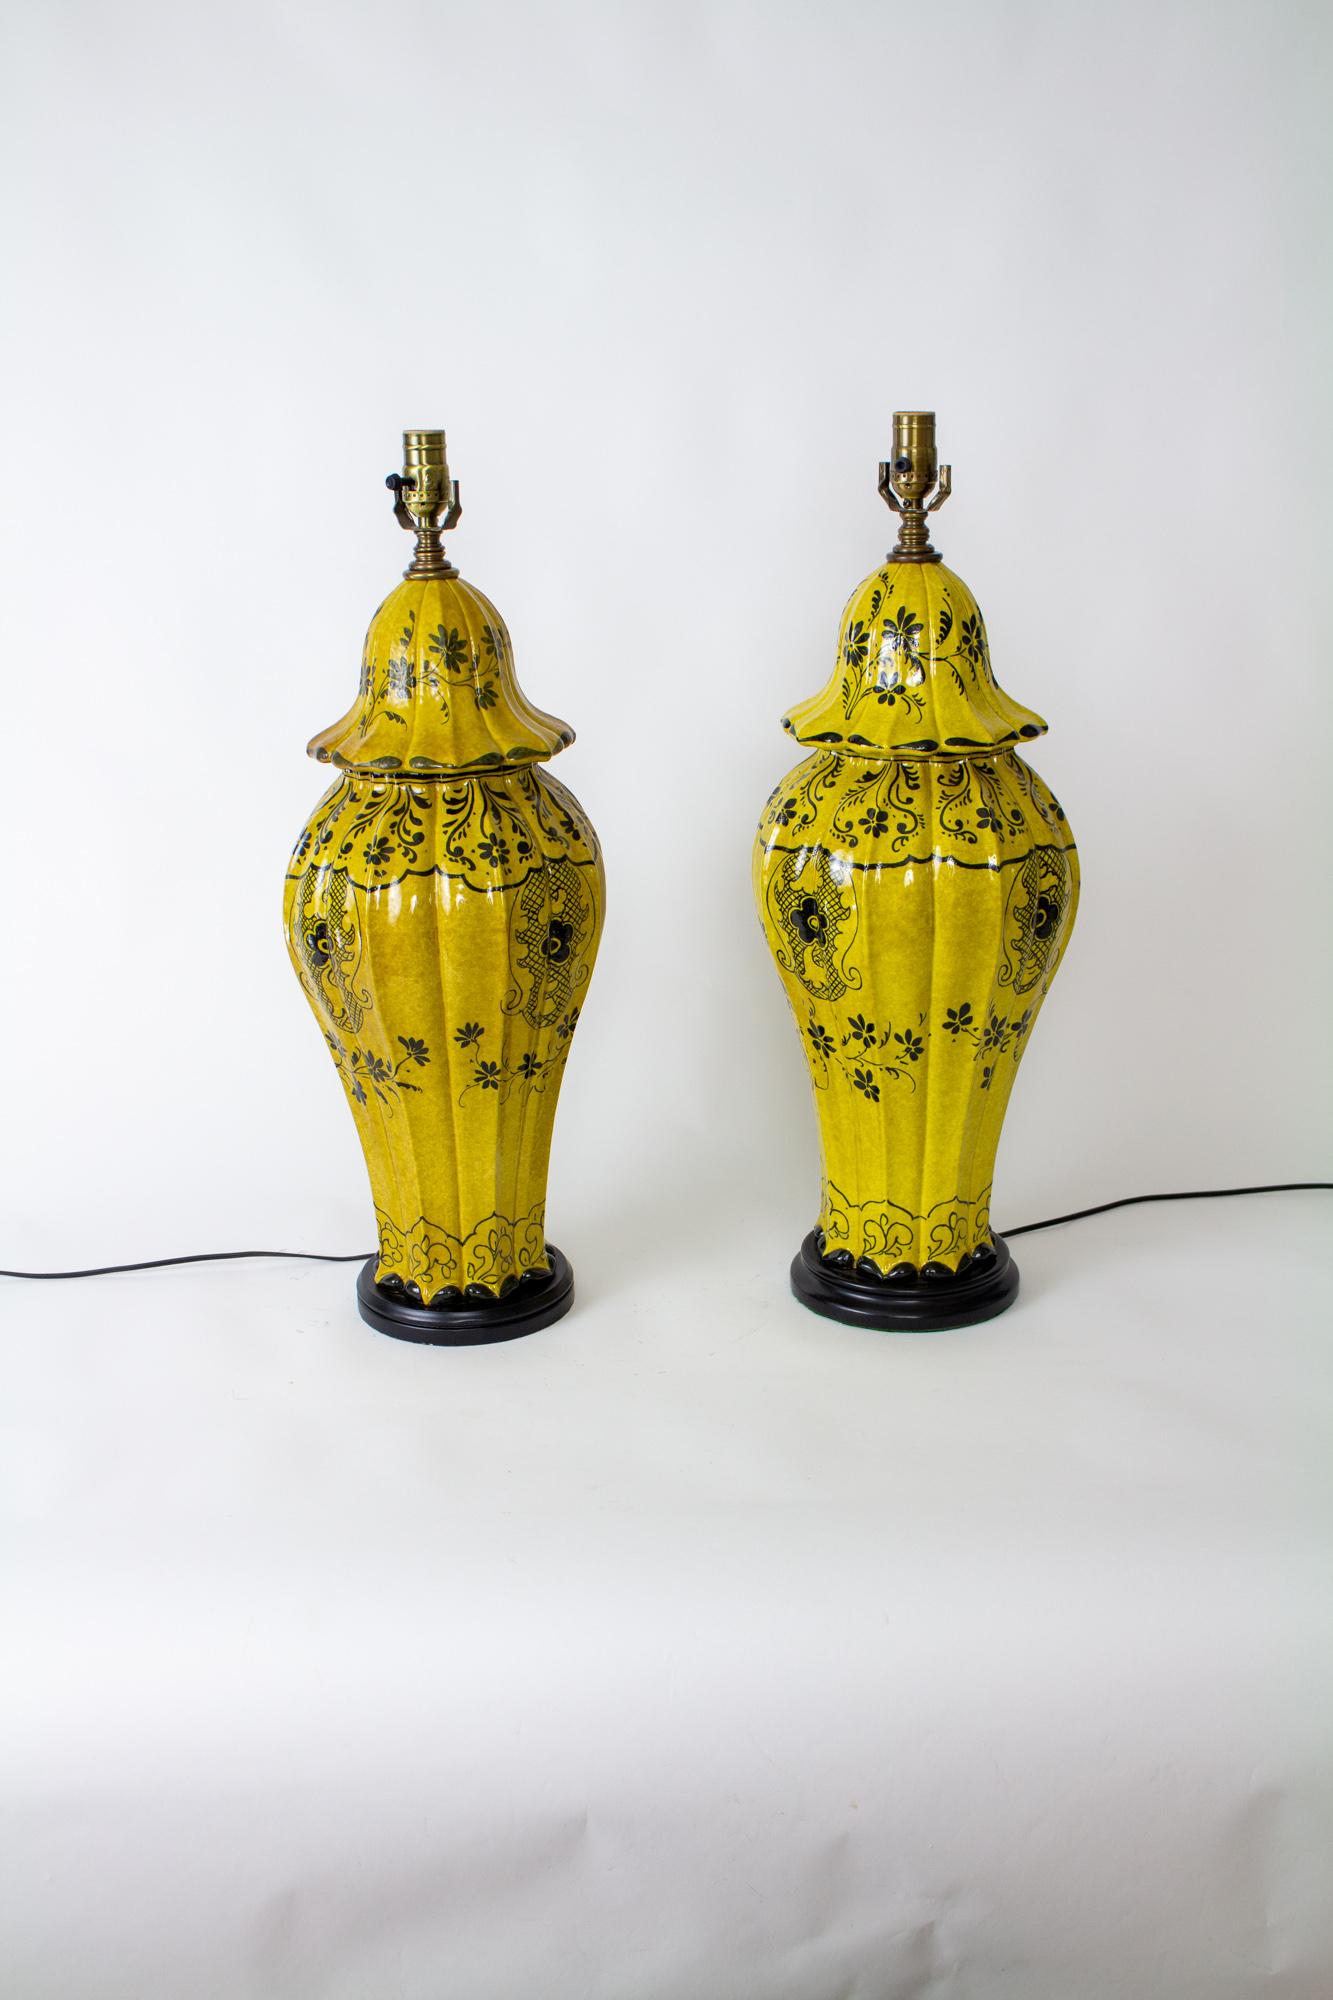 A large pair of ceramic table lamps. Vase shaped with lids, a ribbed shape. Mustard colored glaze with hand-drawn black accents and black wooden bases. Design is of flowers and leaves. Rewired with new sockets. The lamps are slightly varied in